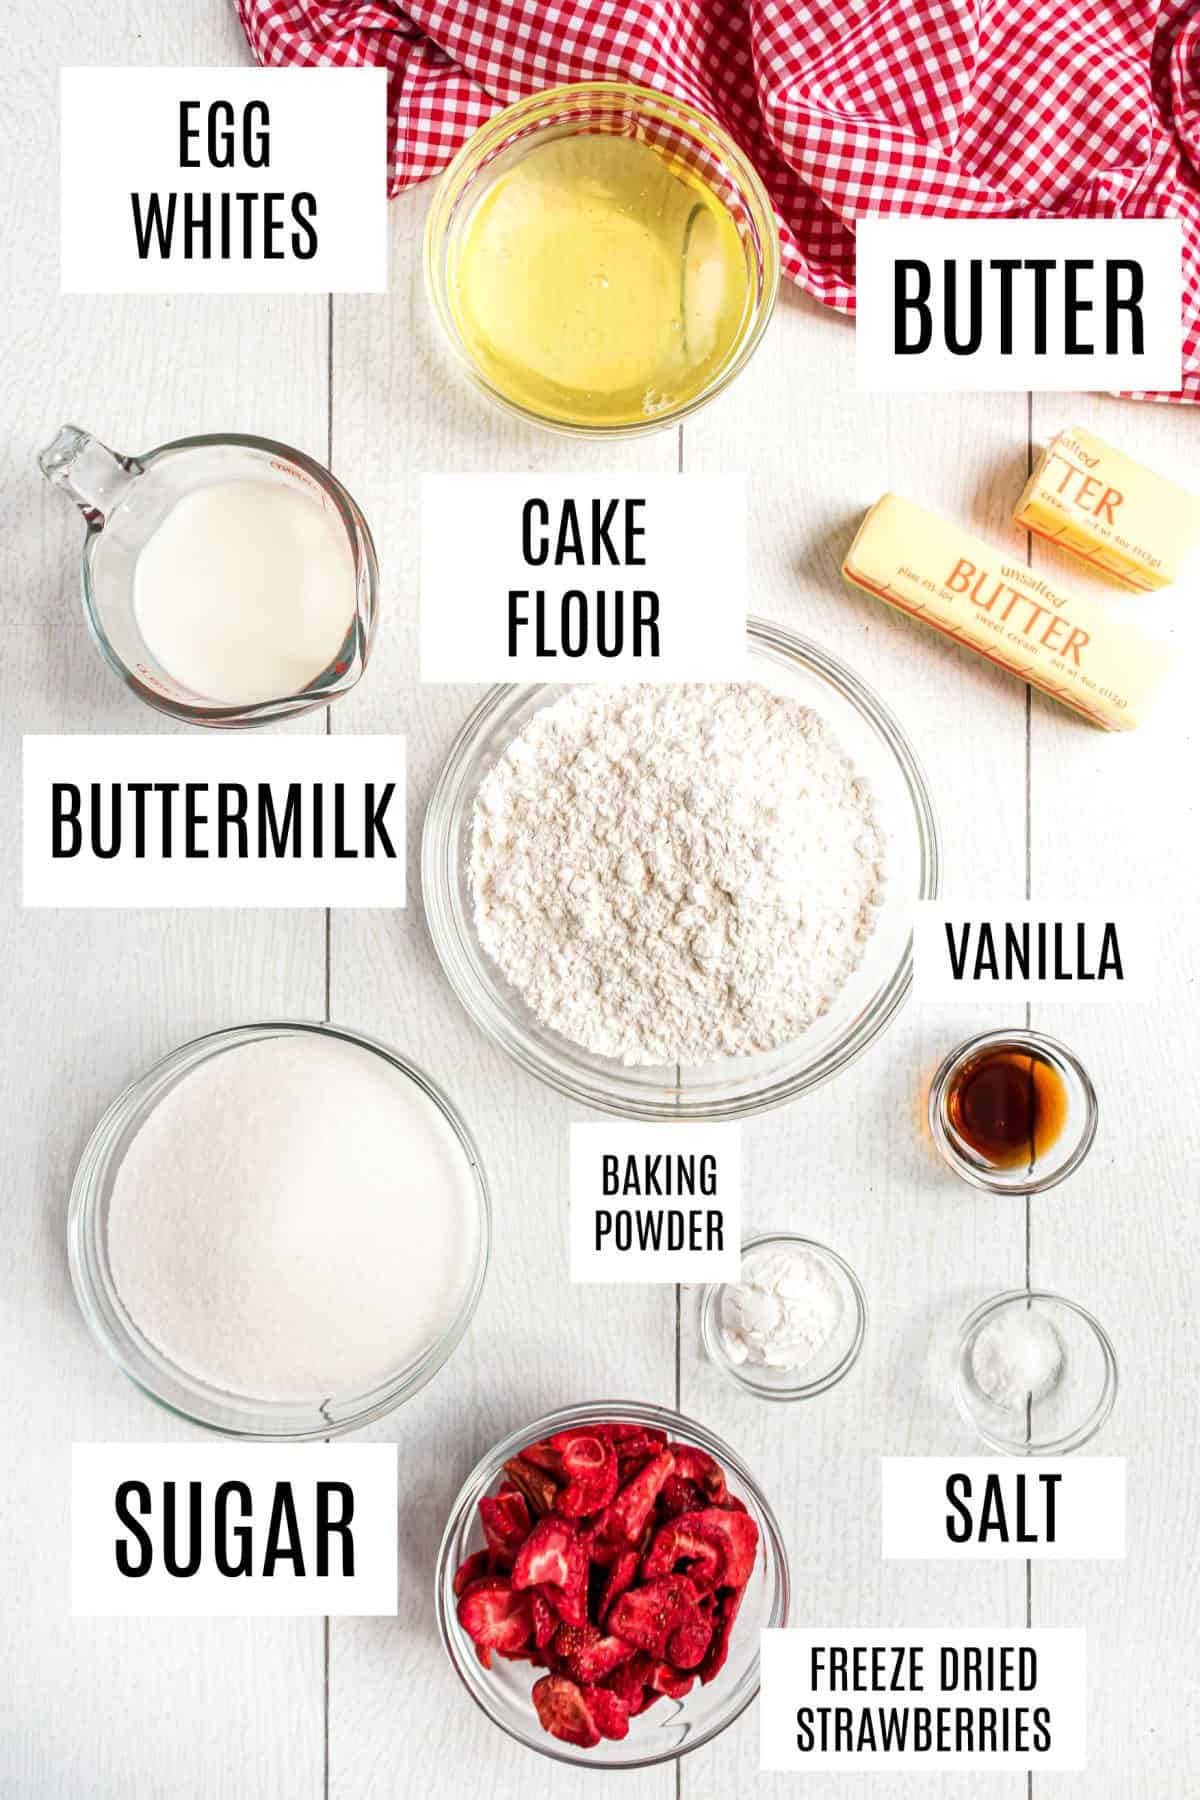 Ingredients needed to make strawberry cupcakes.